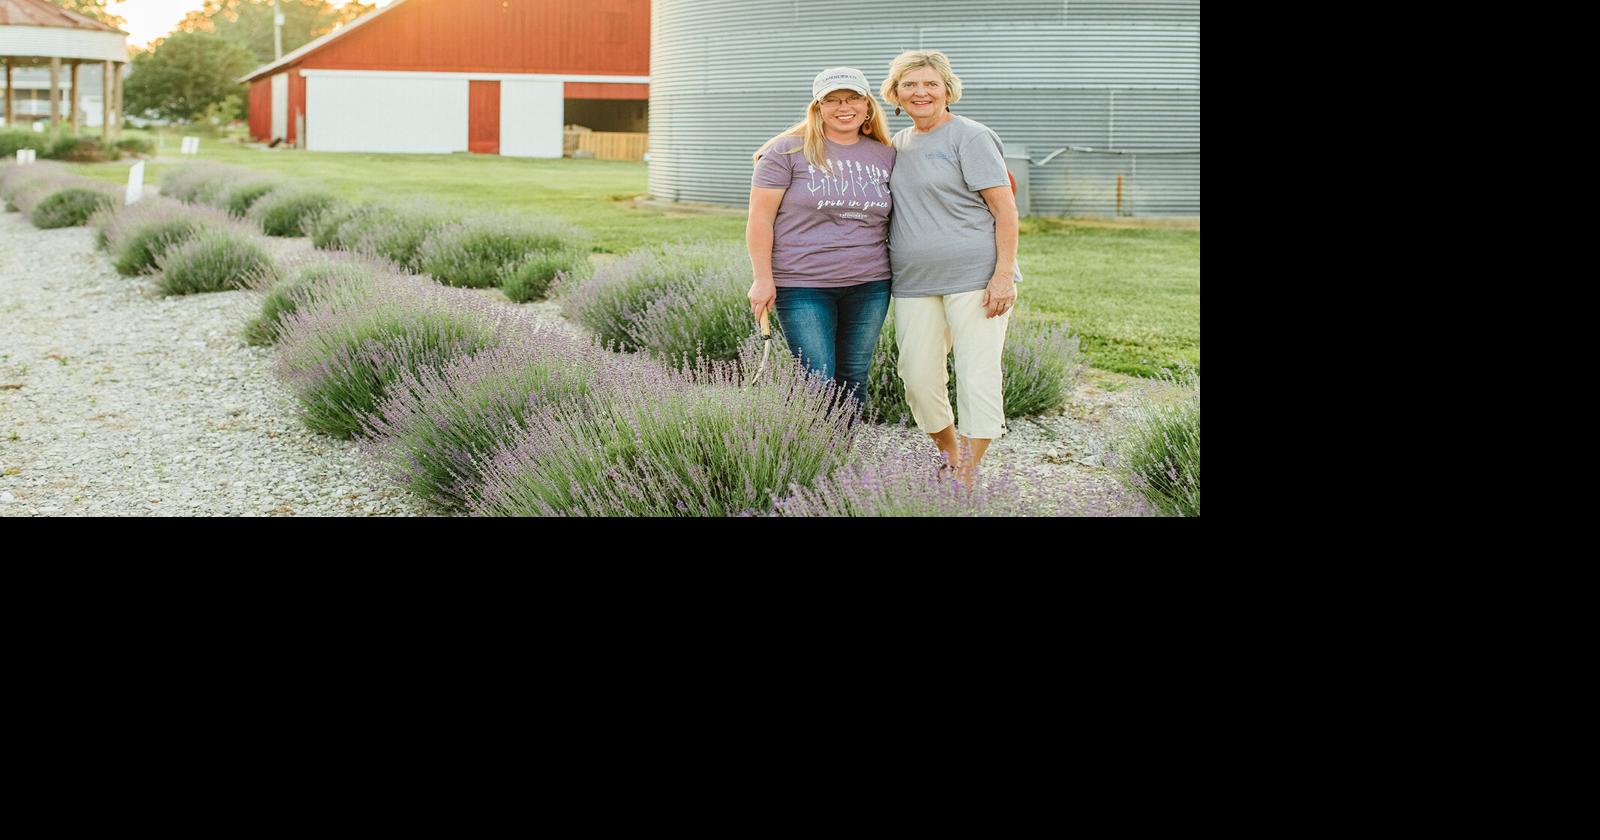 Pulaski County women making a difference through agriculture